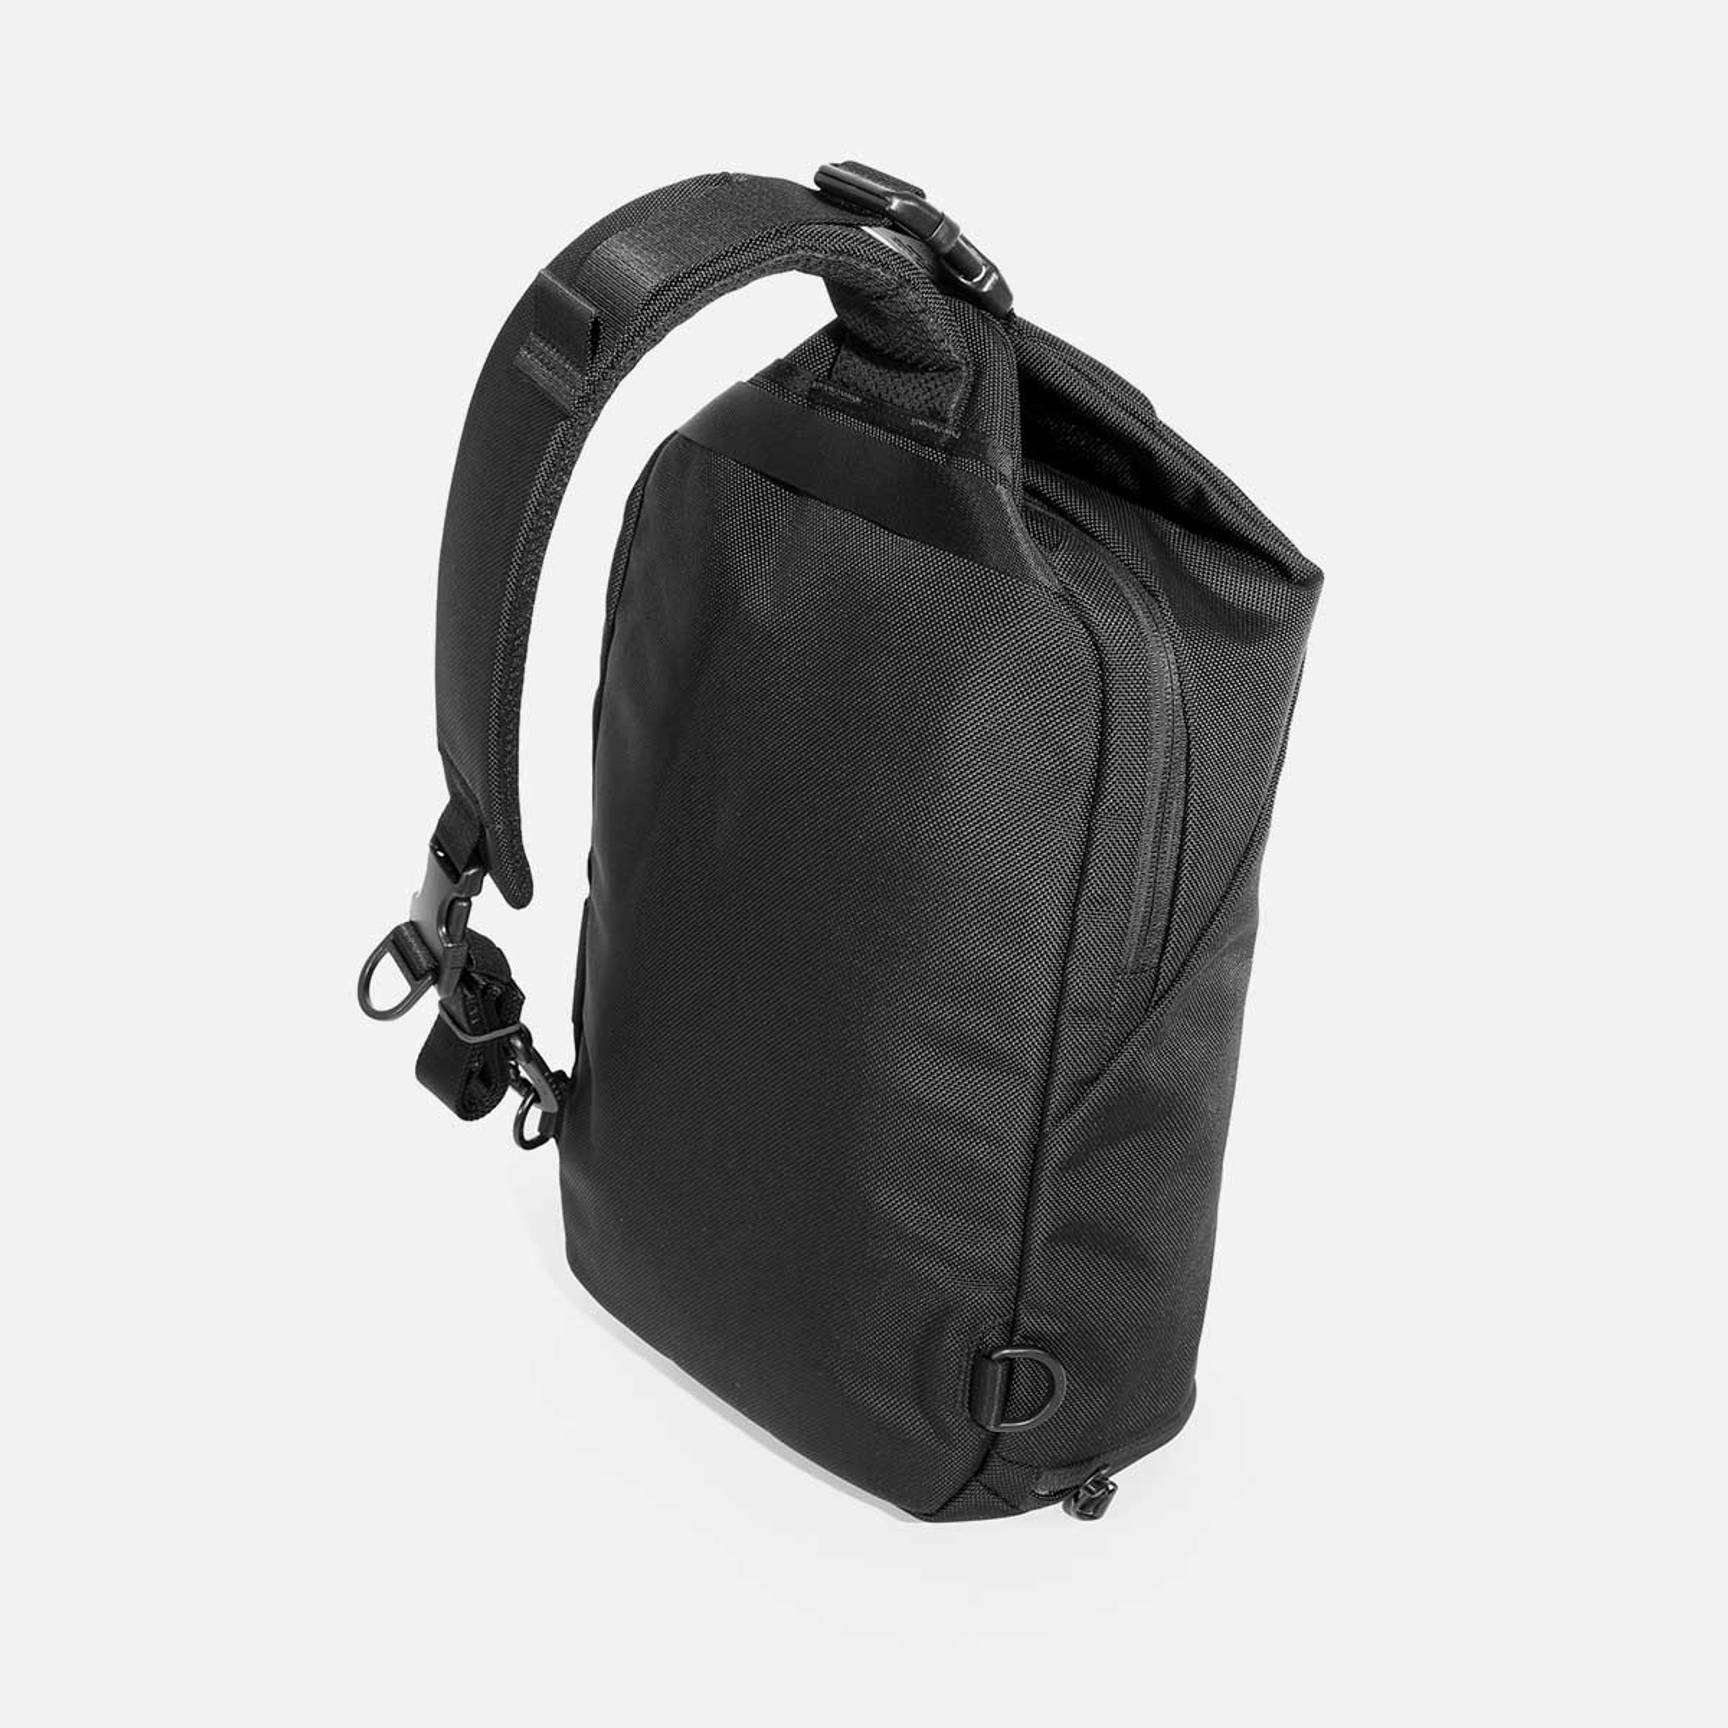 Aer - BACK IN STOCK -- The best-selling City Sling is now